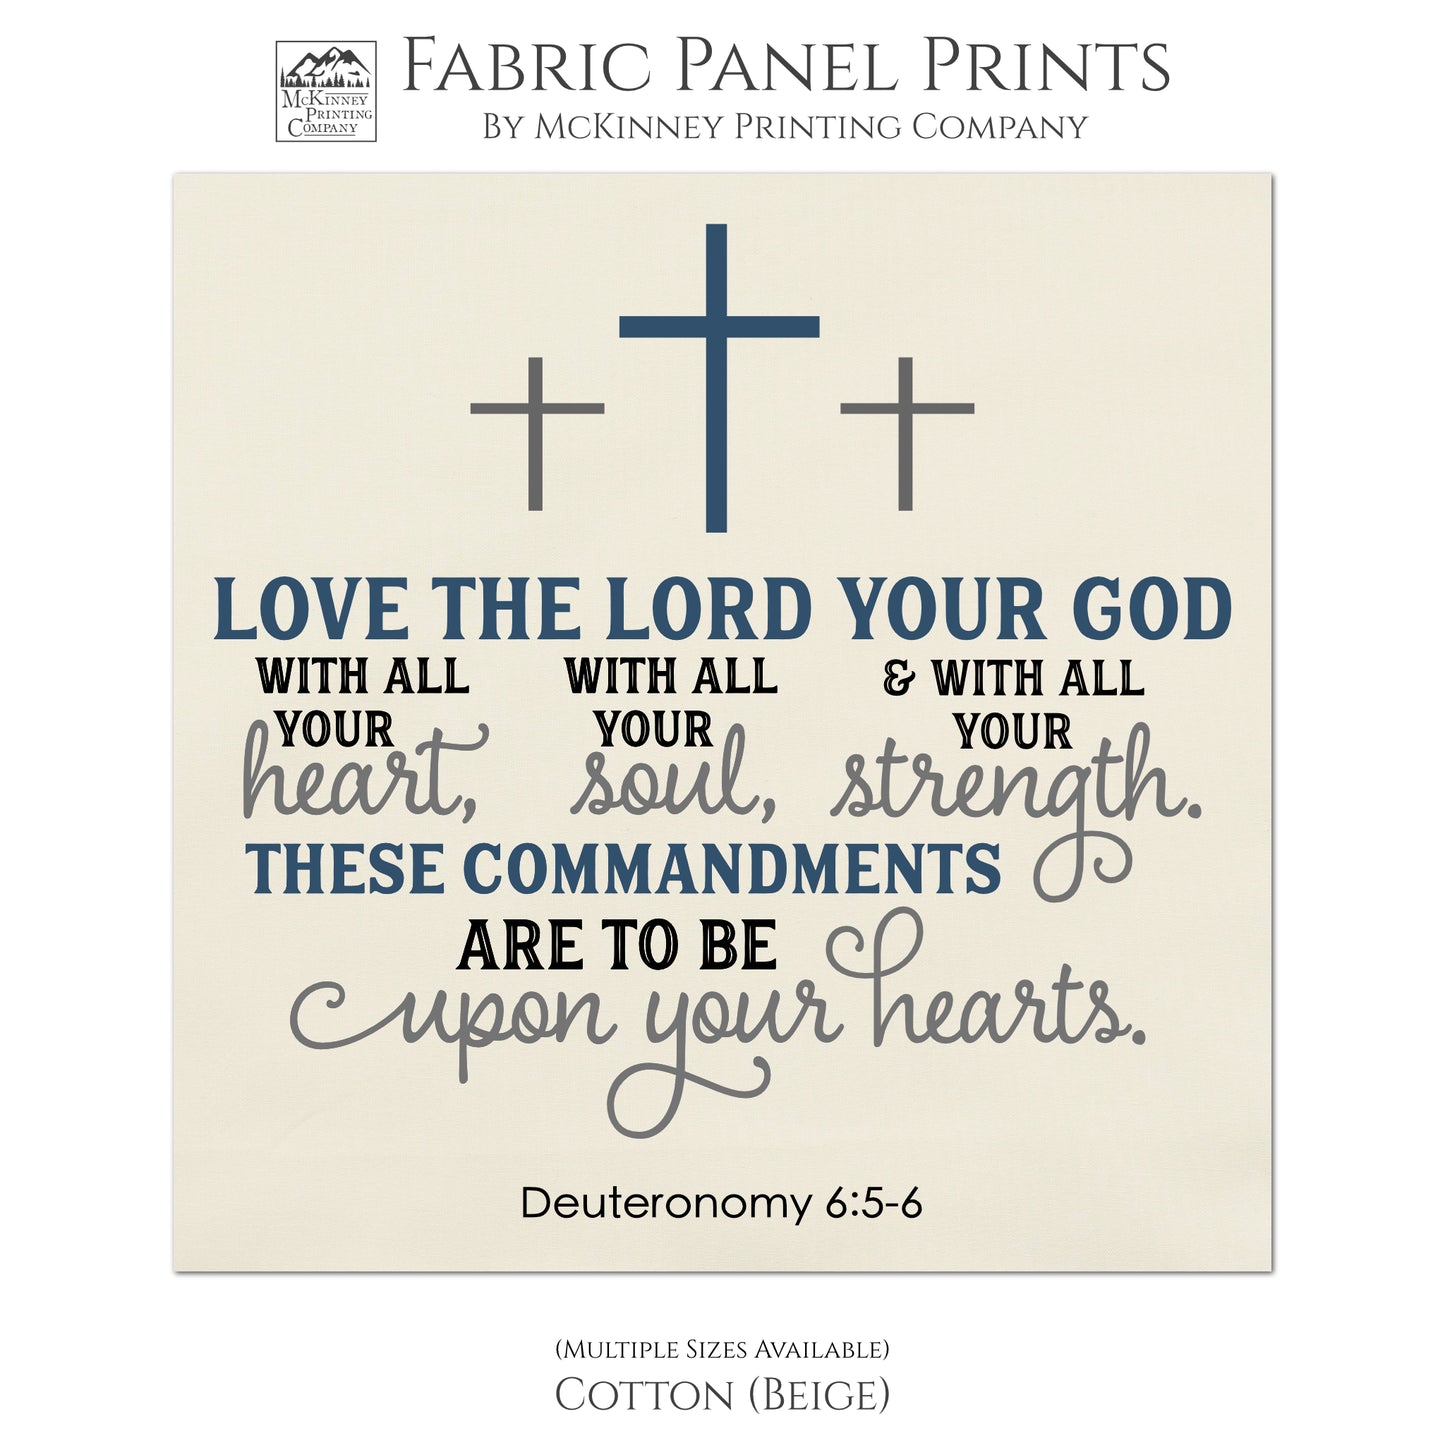 Deuteronomy 6:5 - 6, Love the Lord Your God, Scripture Fabric, Wall Art, Decor, Sewing, Materials, Craft - Kona Cotton